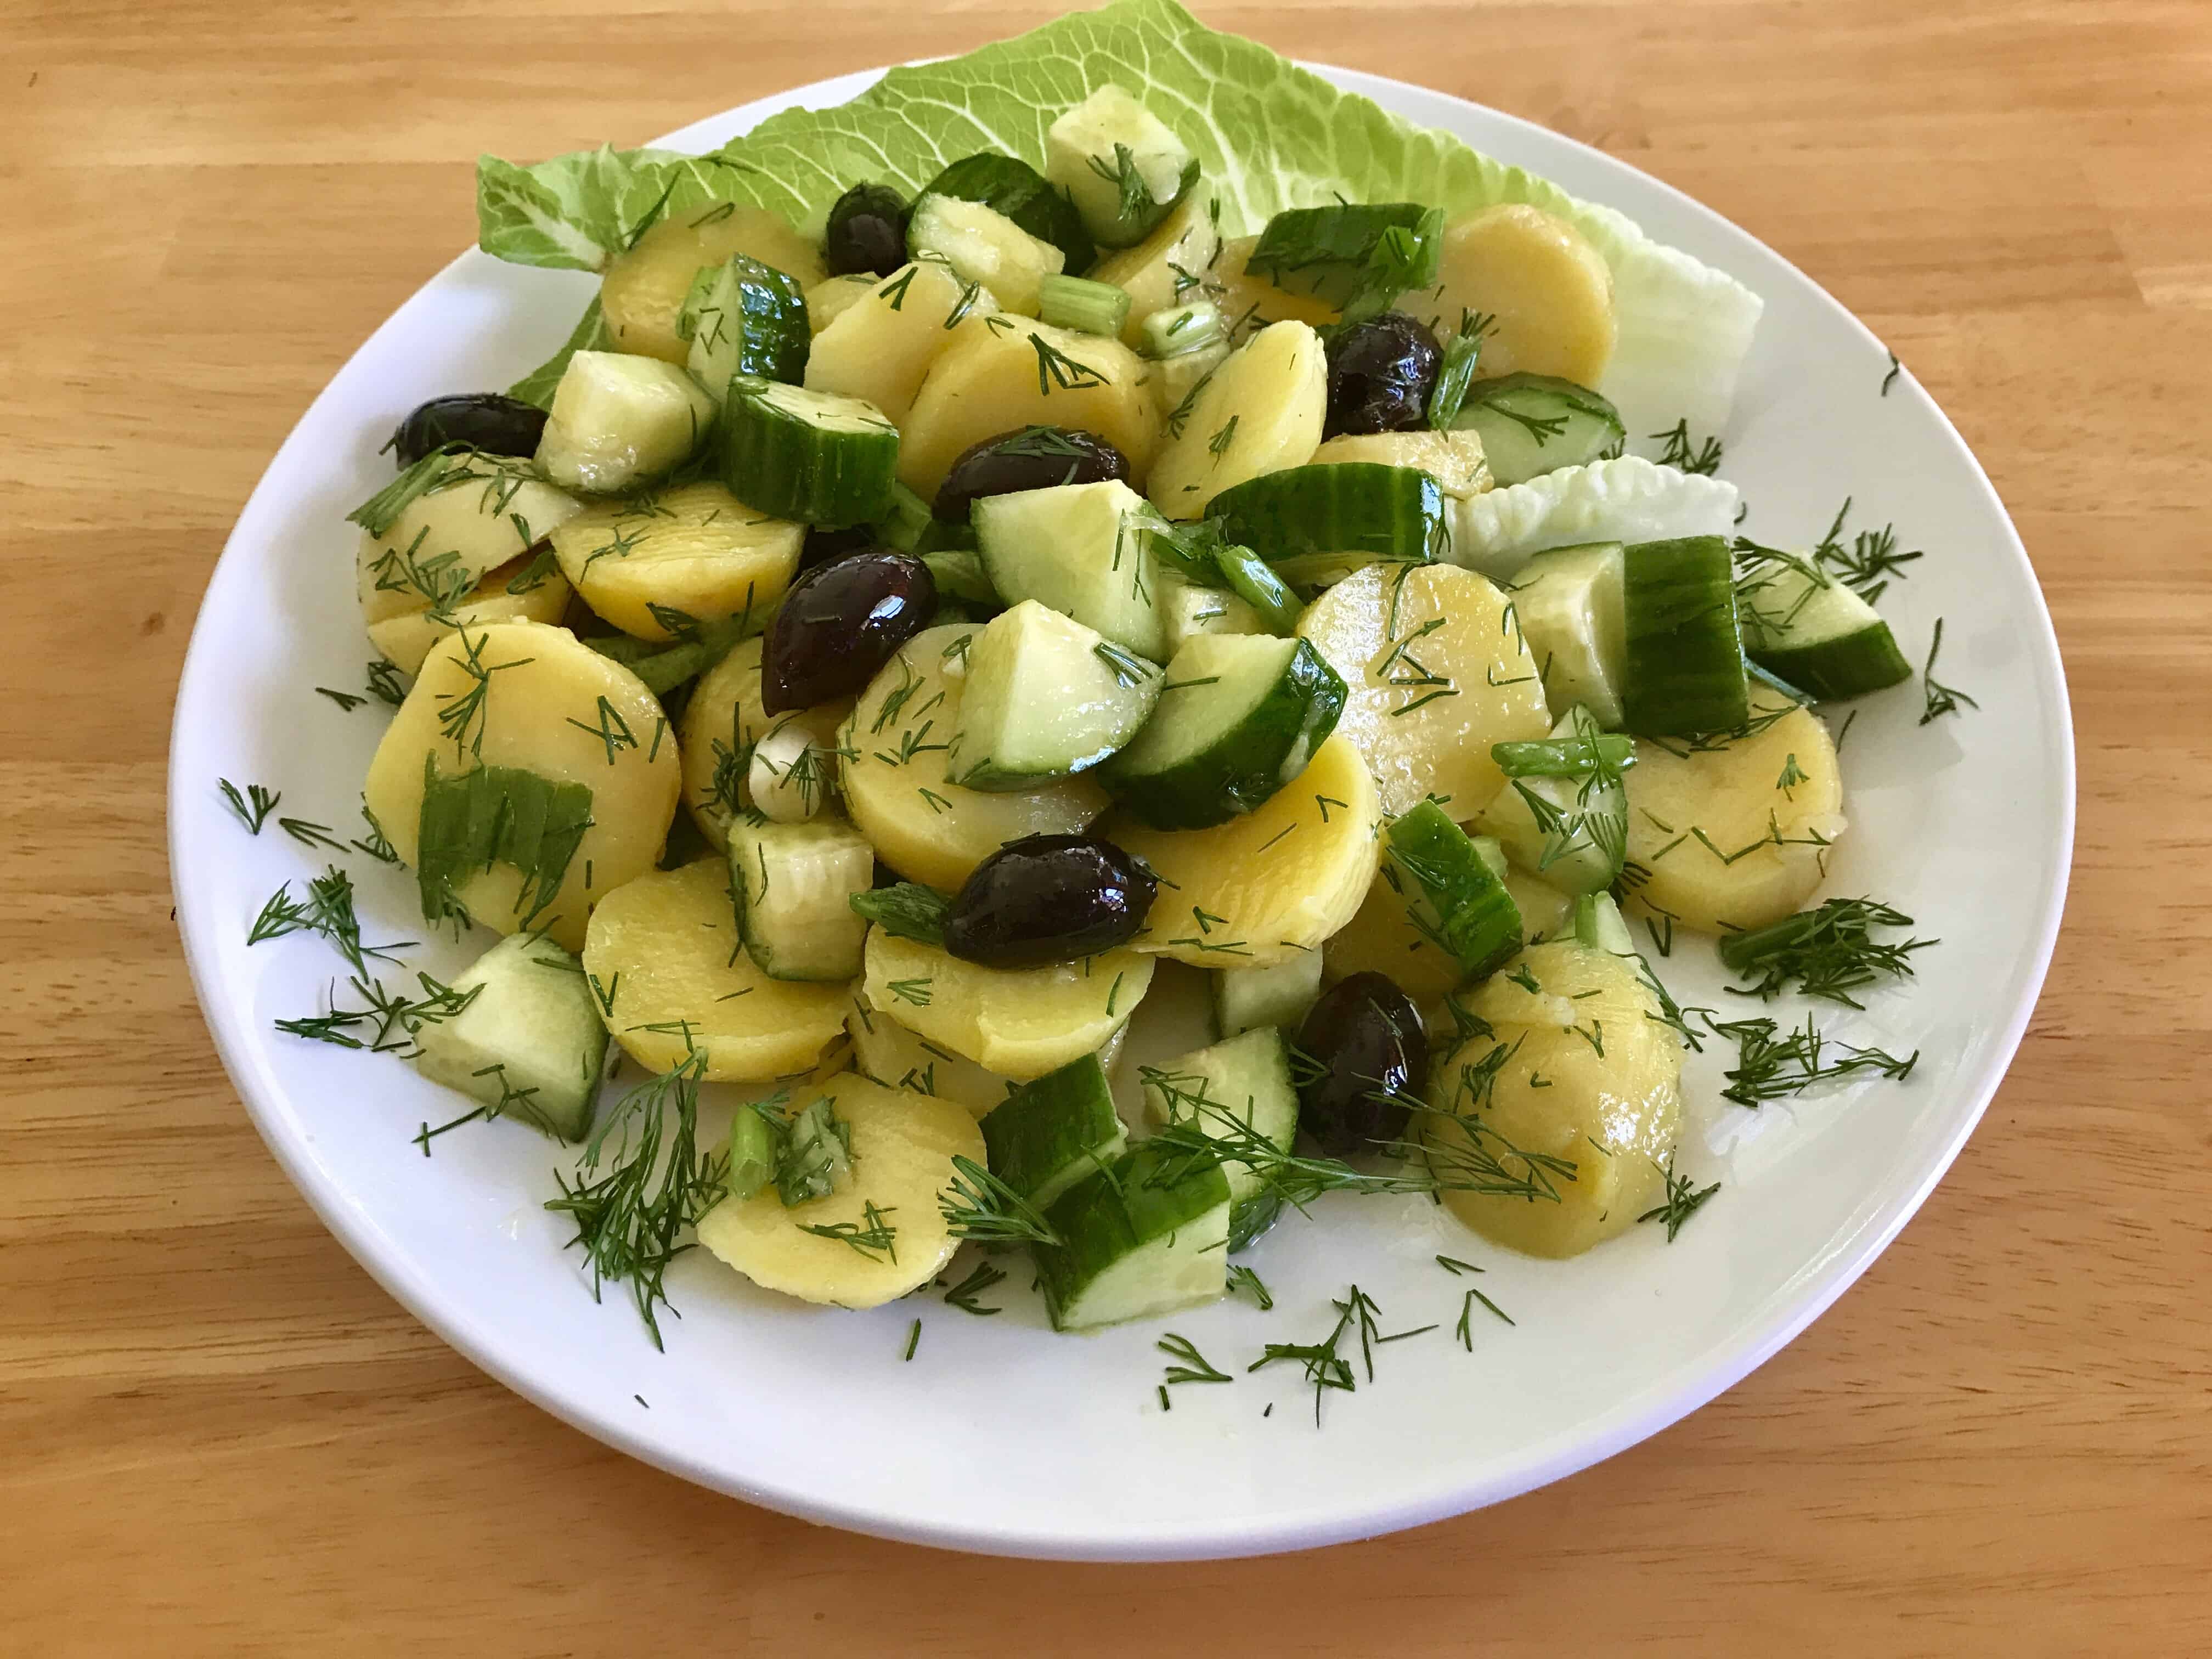 Dill potato salad, typical in most Mediterranean countries. It's served as a side dish to grilled meats